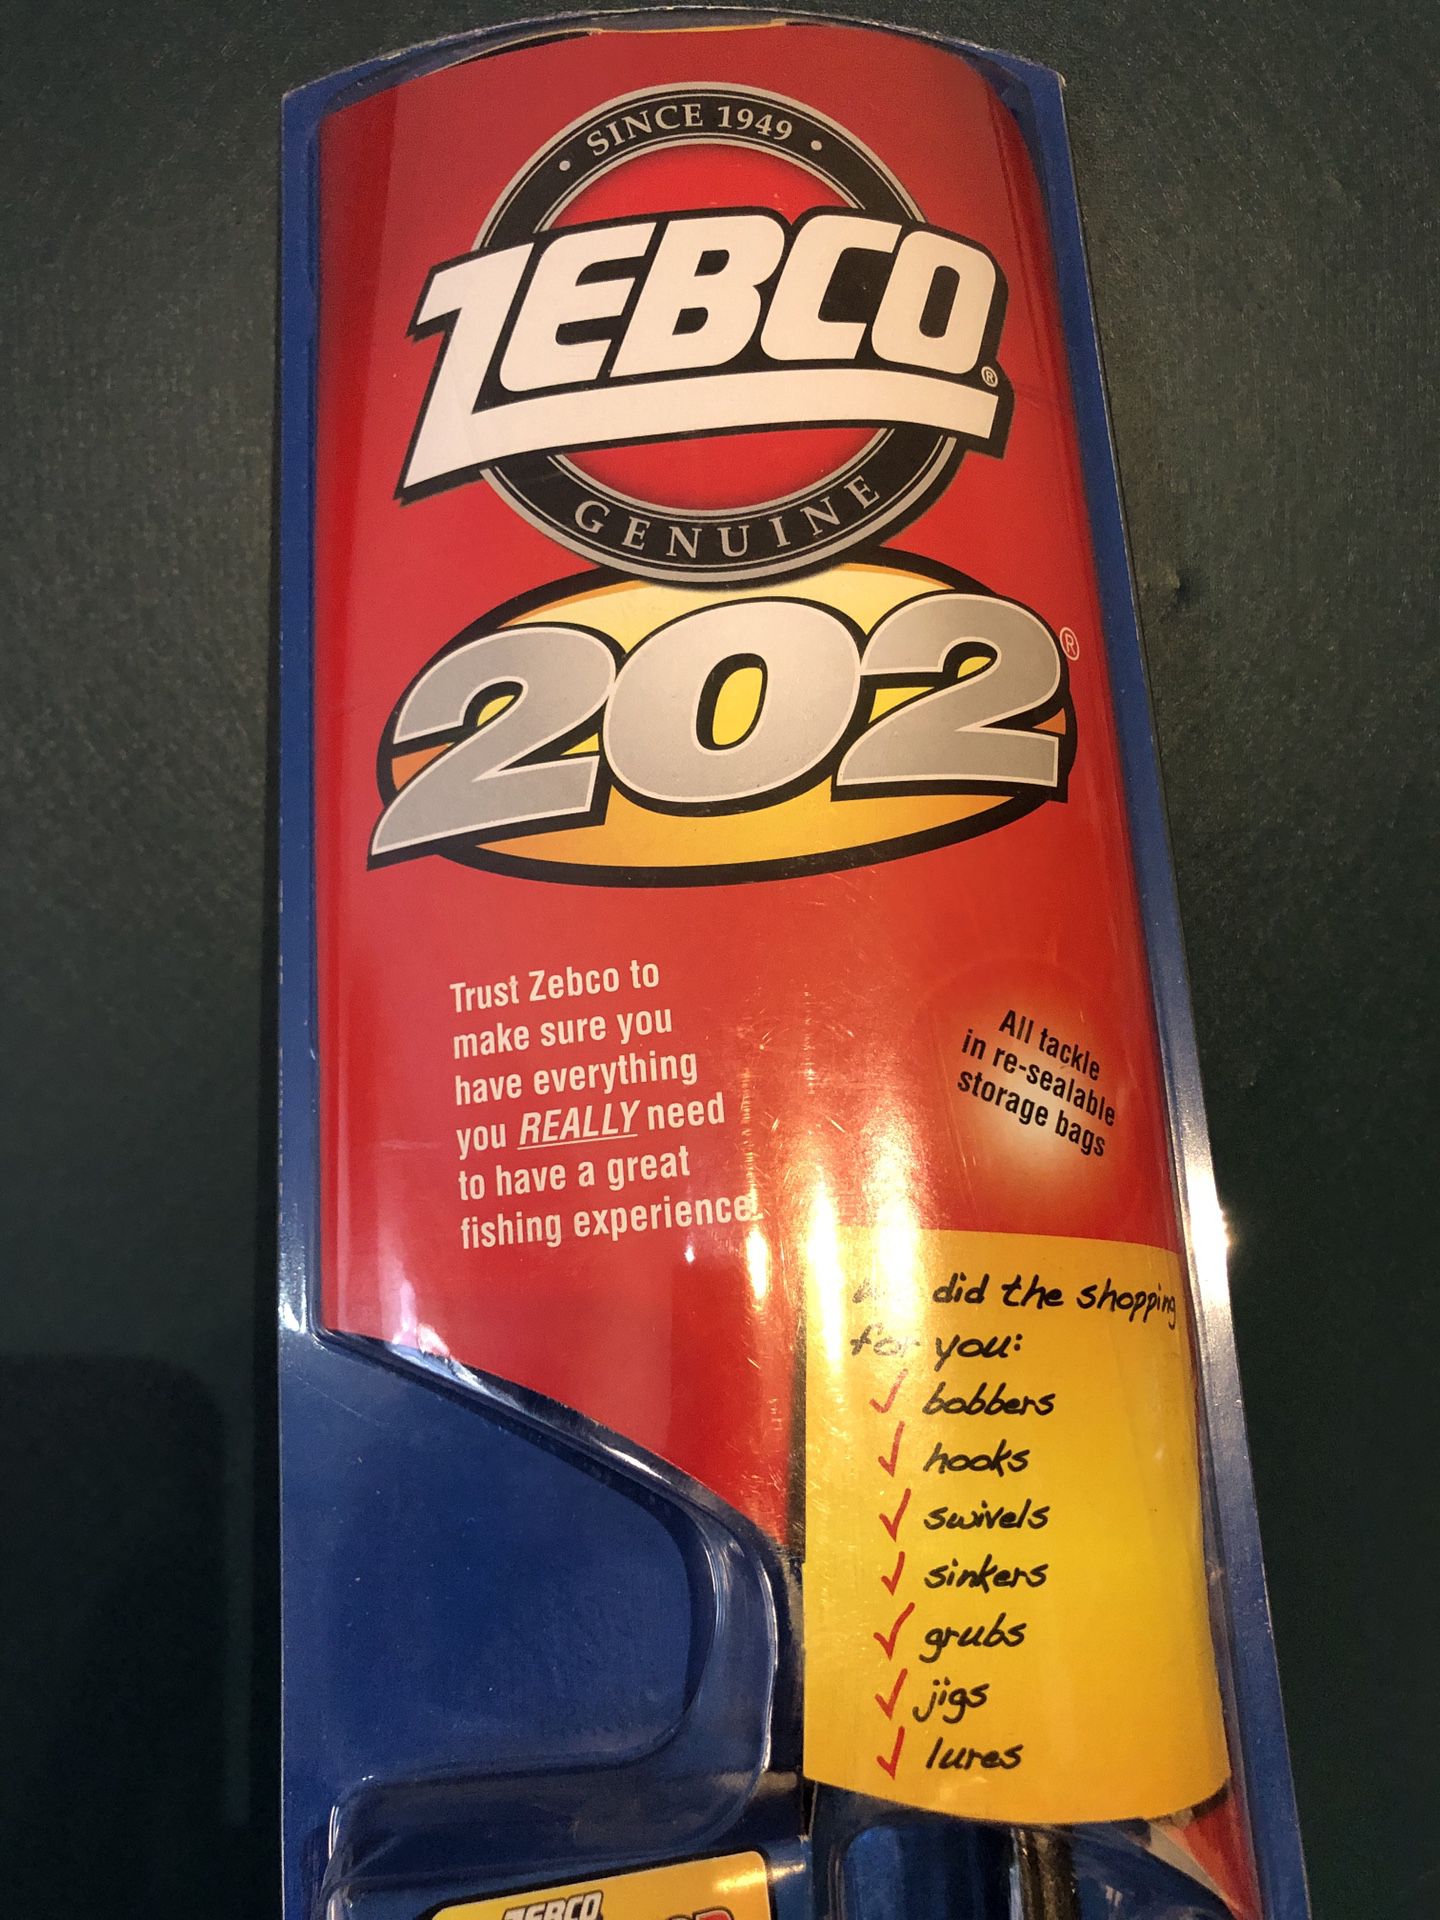 Fishing rod kids. new. ZEBCO 202. complete. 